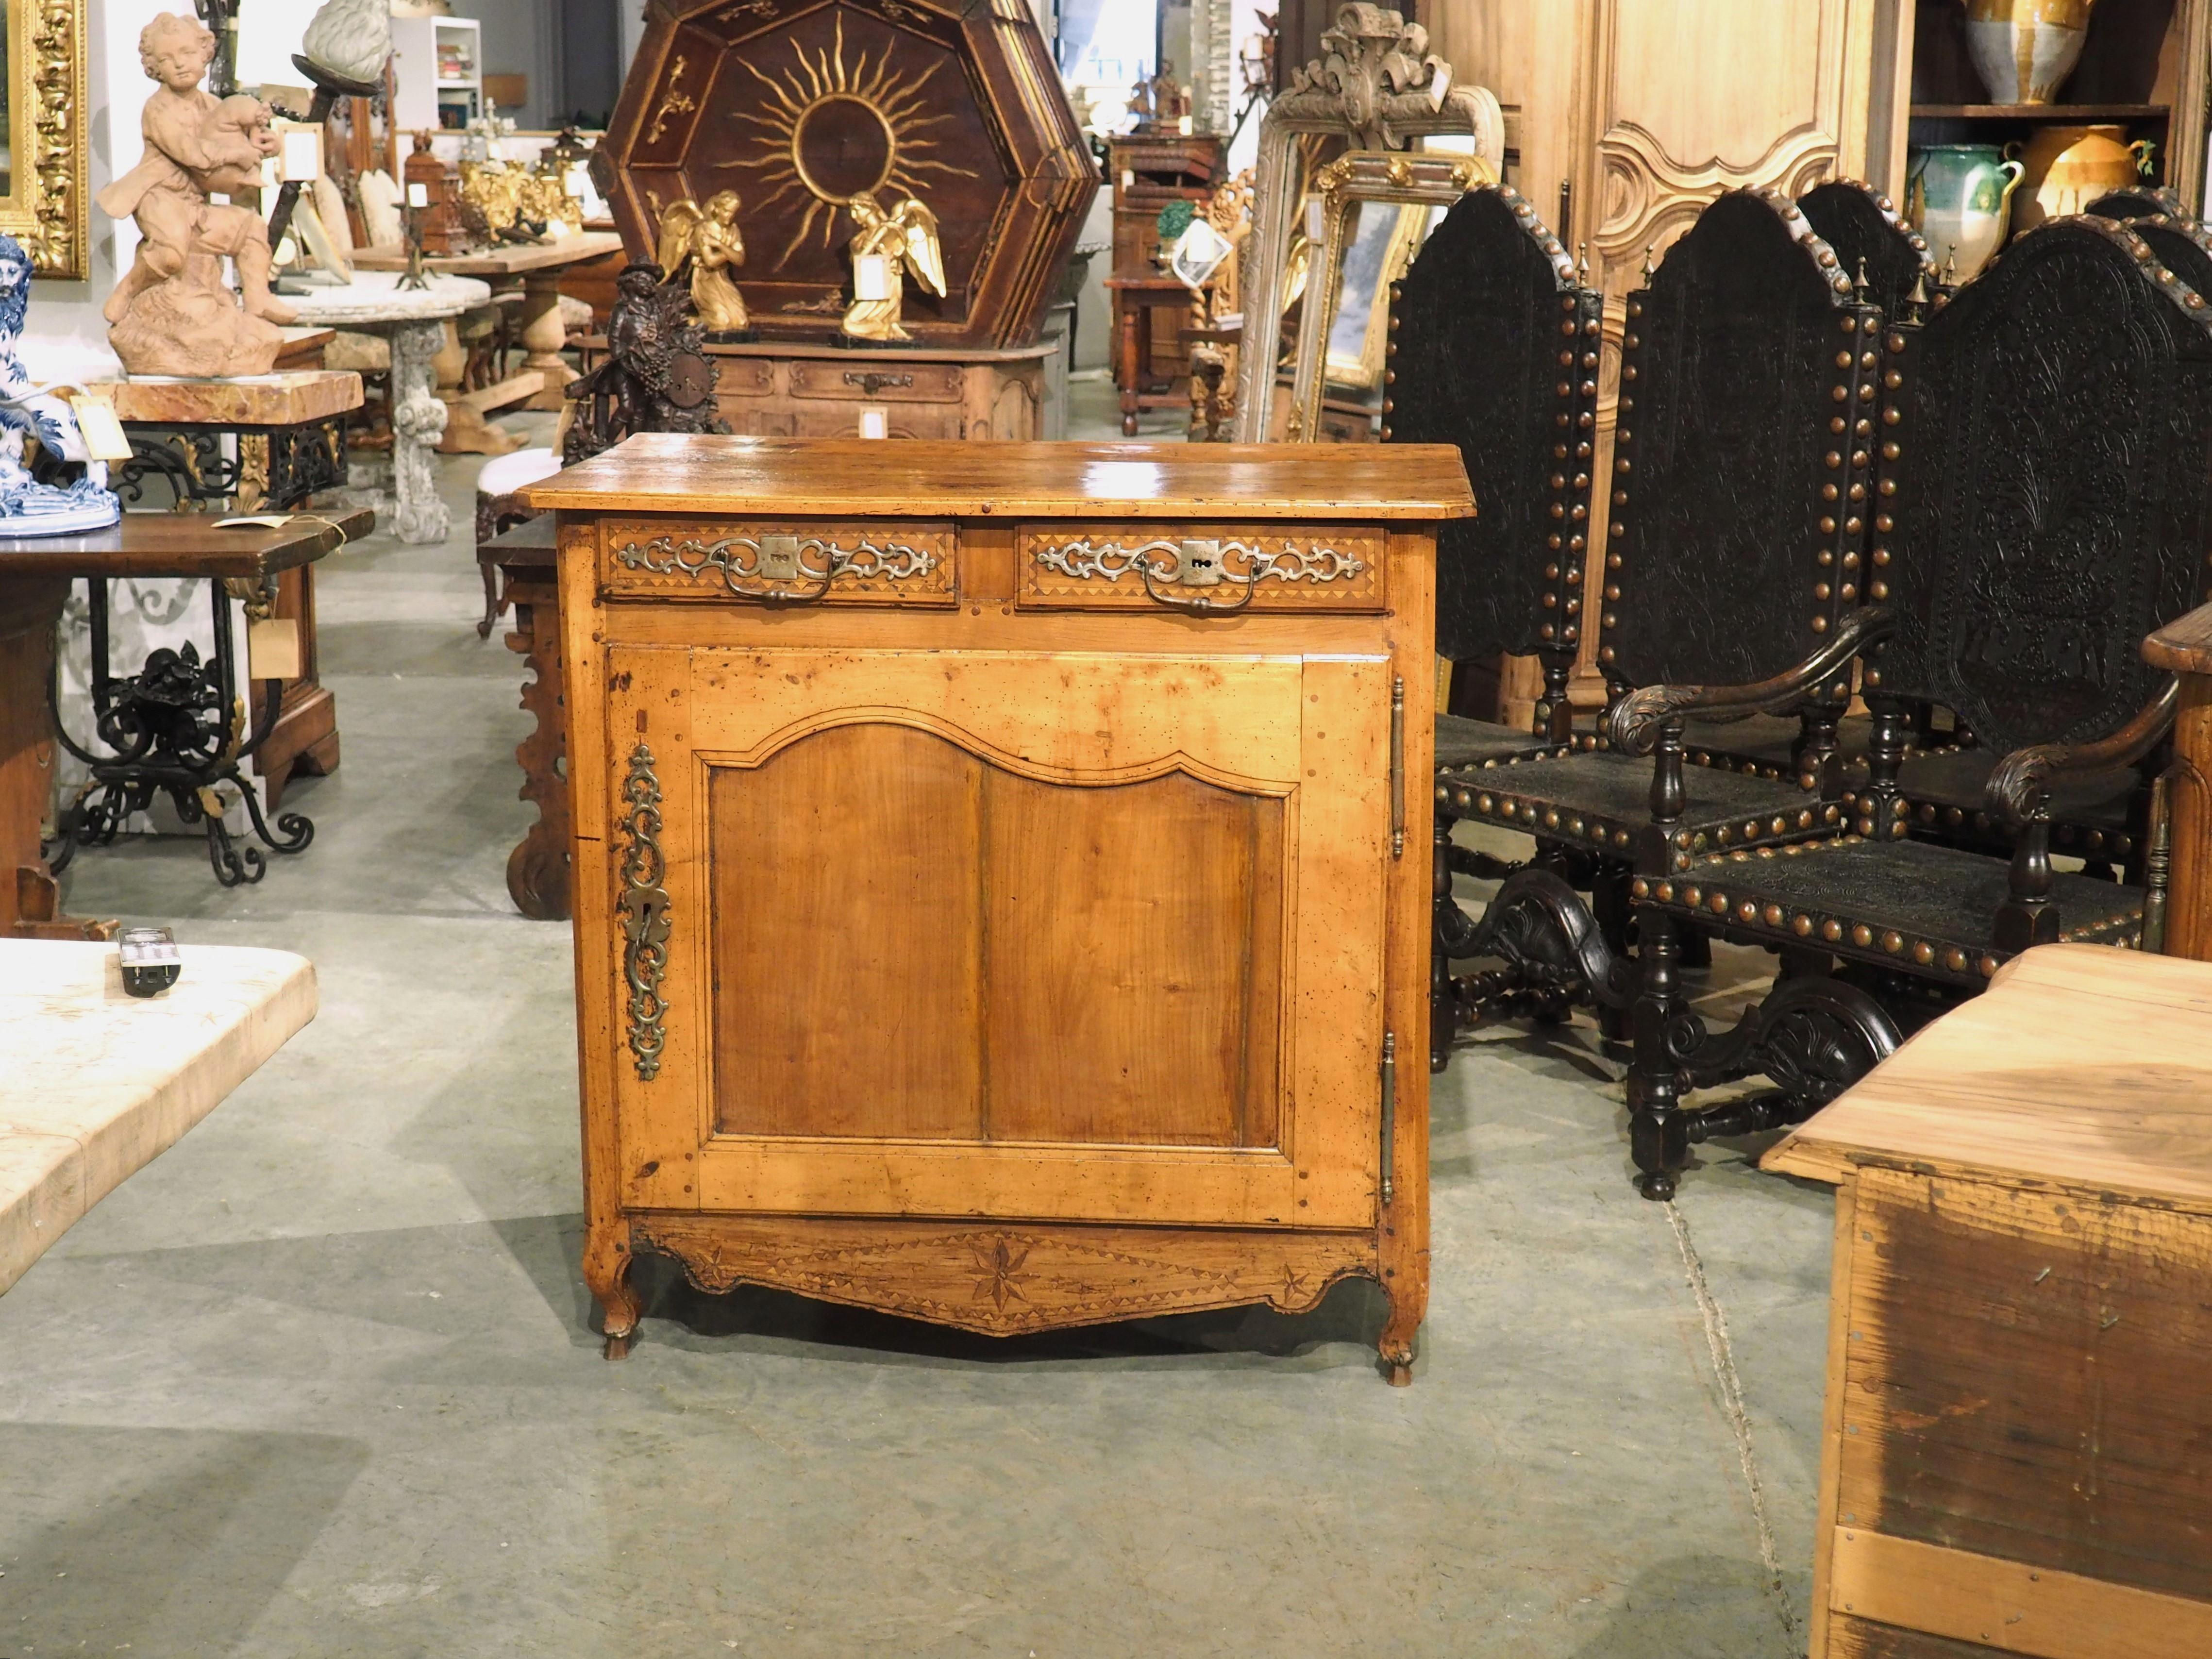 Hand-Carved 18th Century French Confiturier Cabinet in Carved Cherrywood